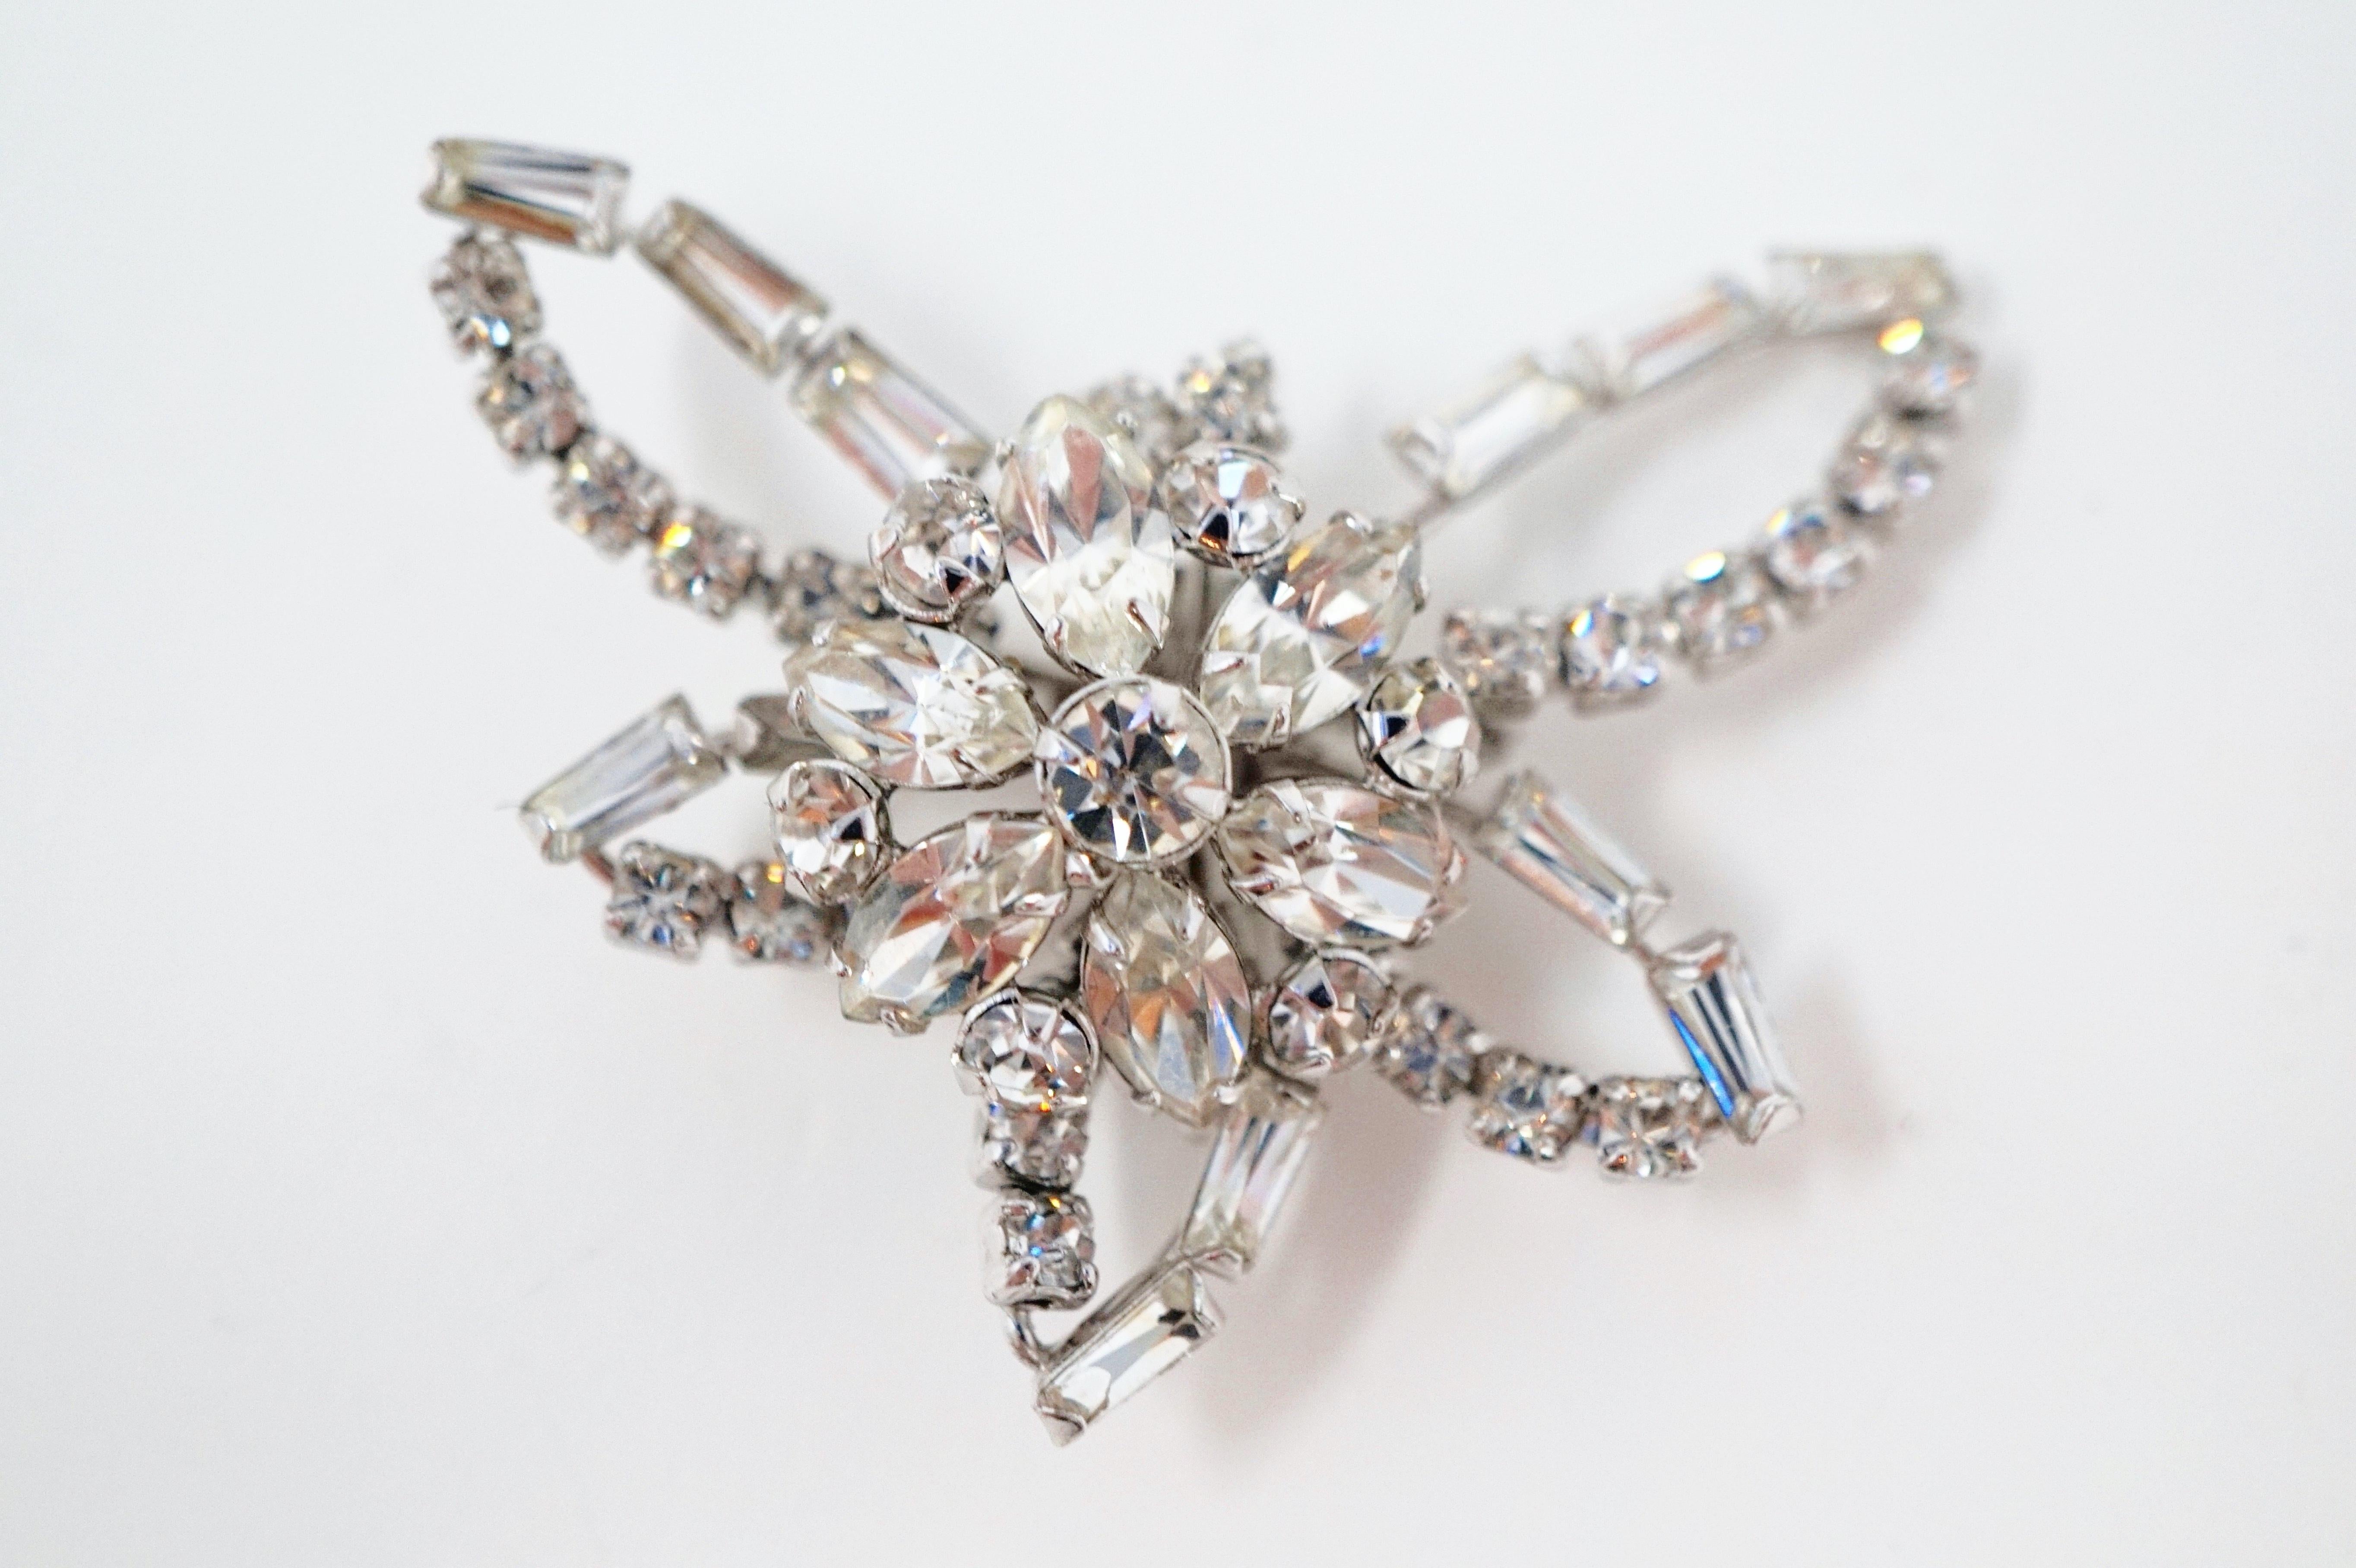 A beautiful 1950's vintage crystal rhinestone brooch with sterling silver hardware by Phyllis W. Jacobs, a popular jeweler from the mid-century. A classic accessory for wedding or formal looks. This brooch is comprised of a medley of sparkling